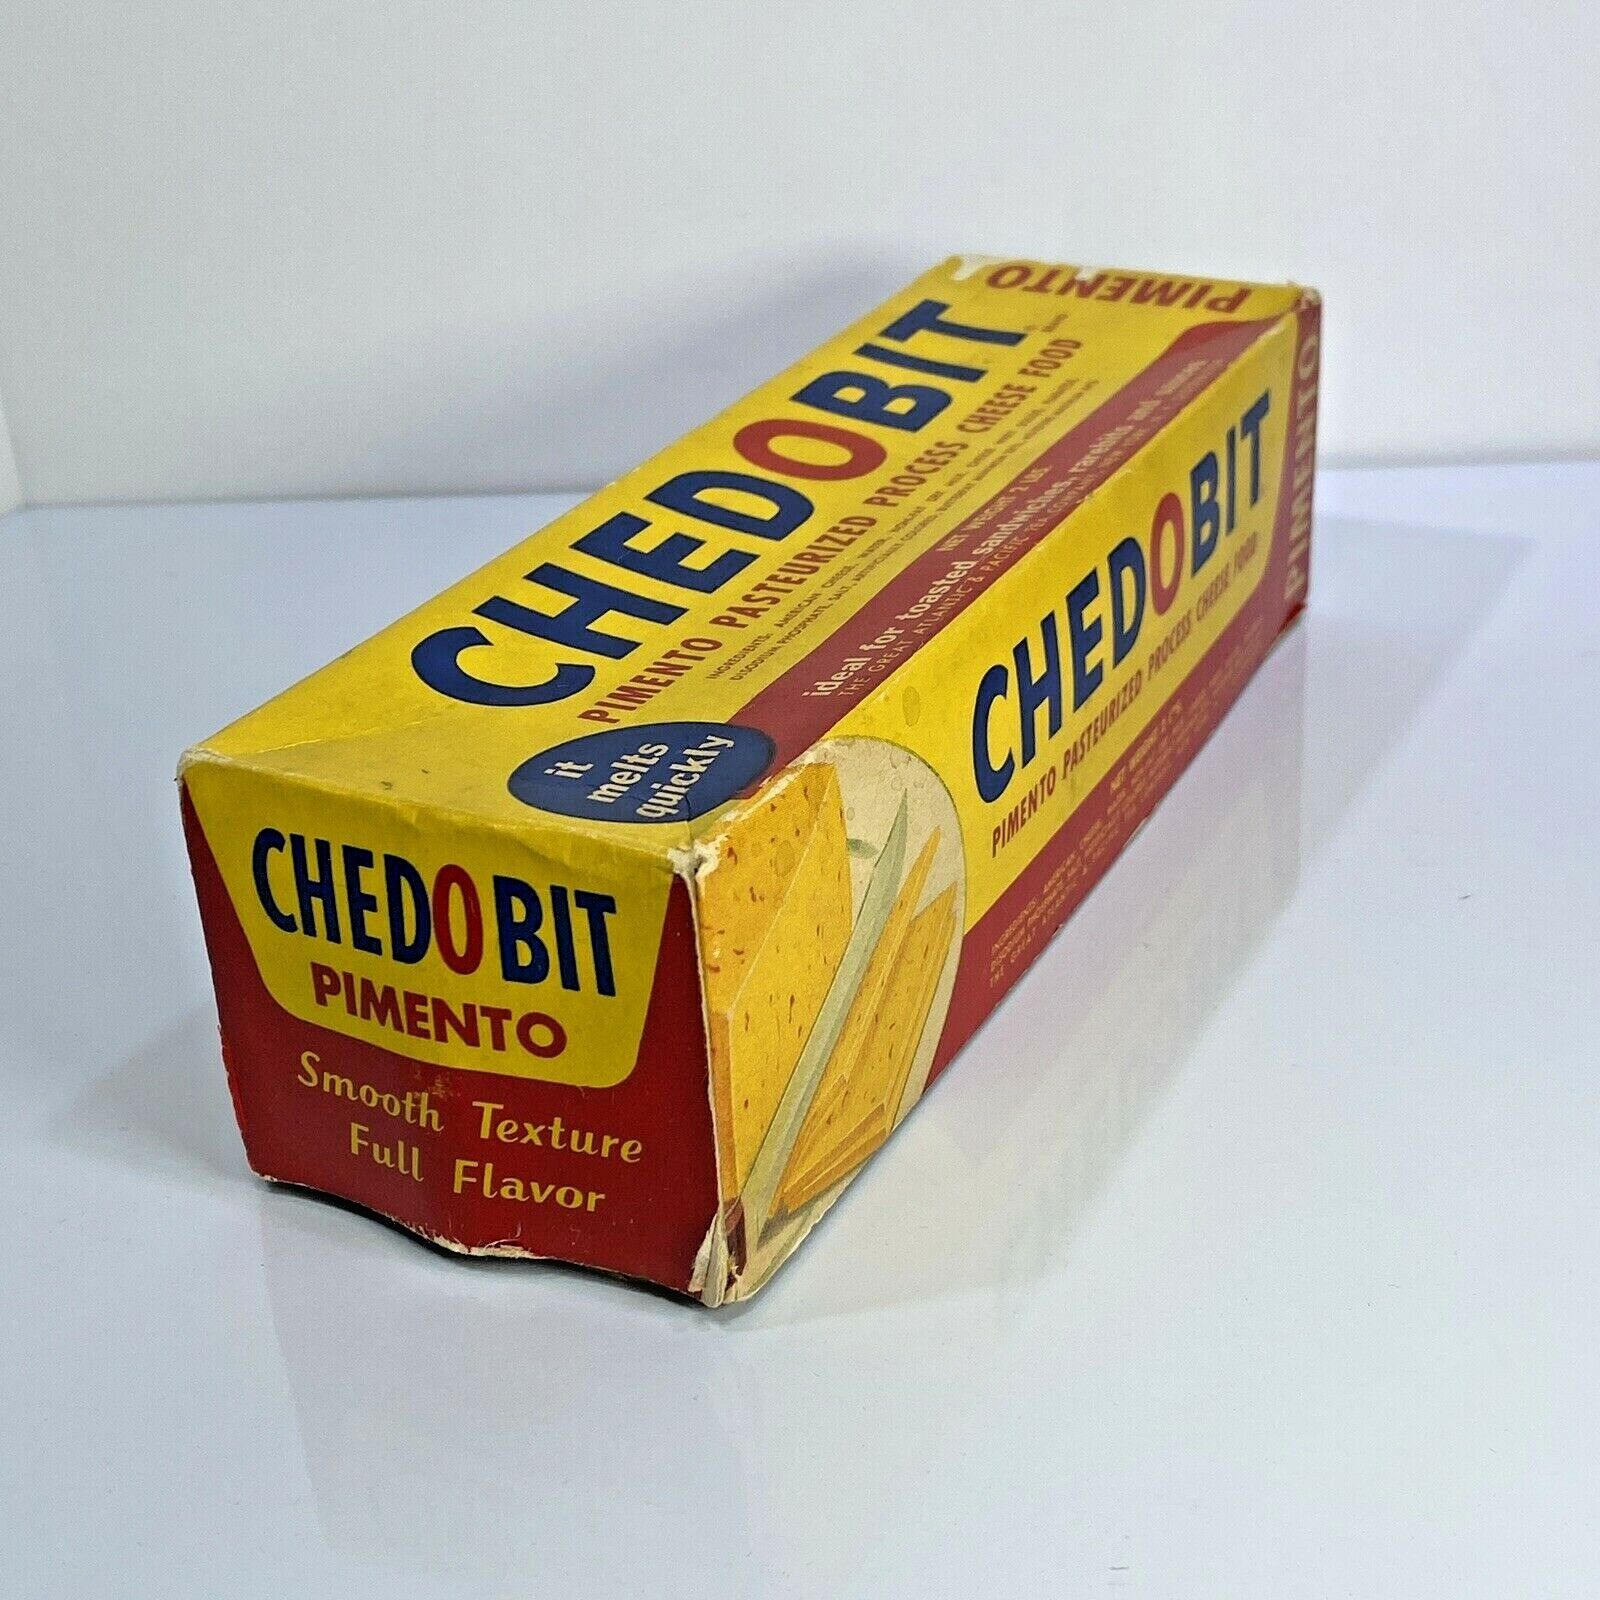 Vtg Pimento Chedobit Processed Cheese A&P Stores Empty 2lb Food Box Container